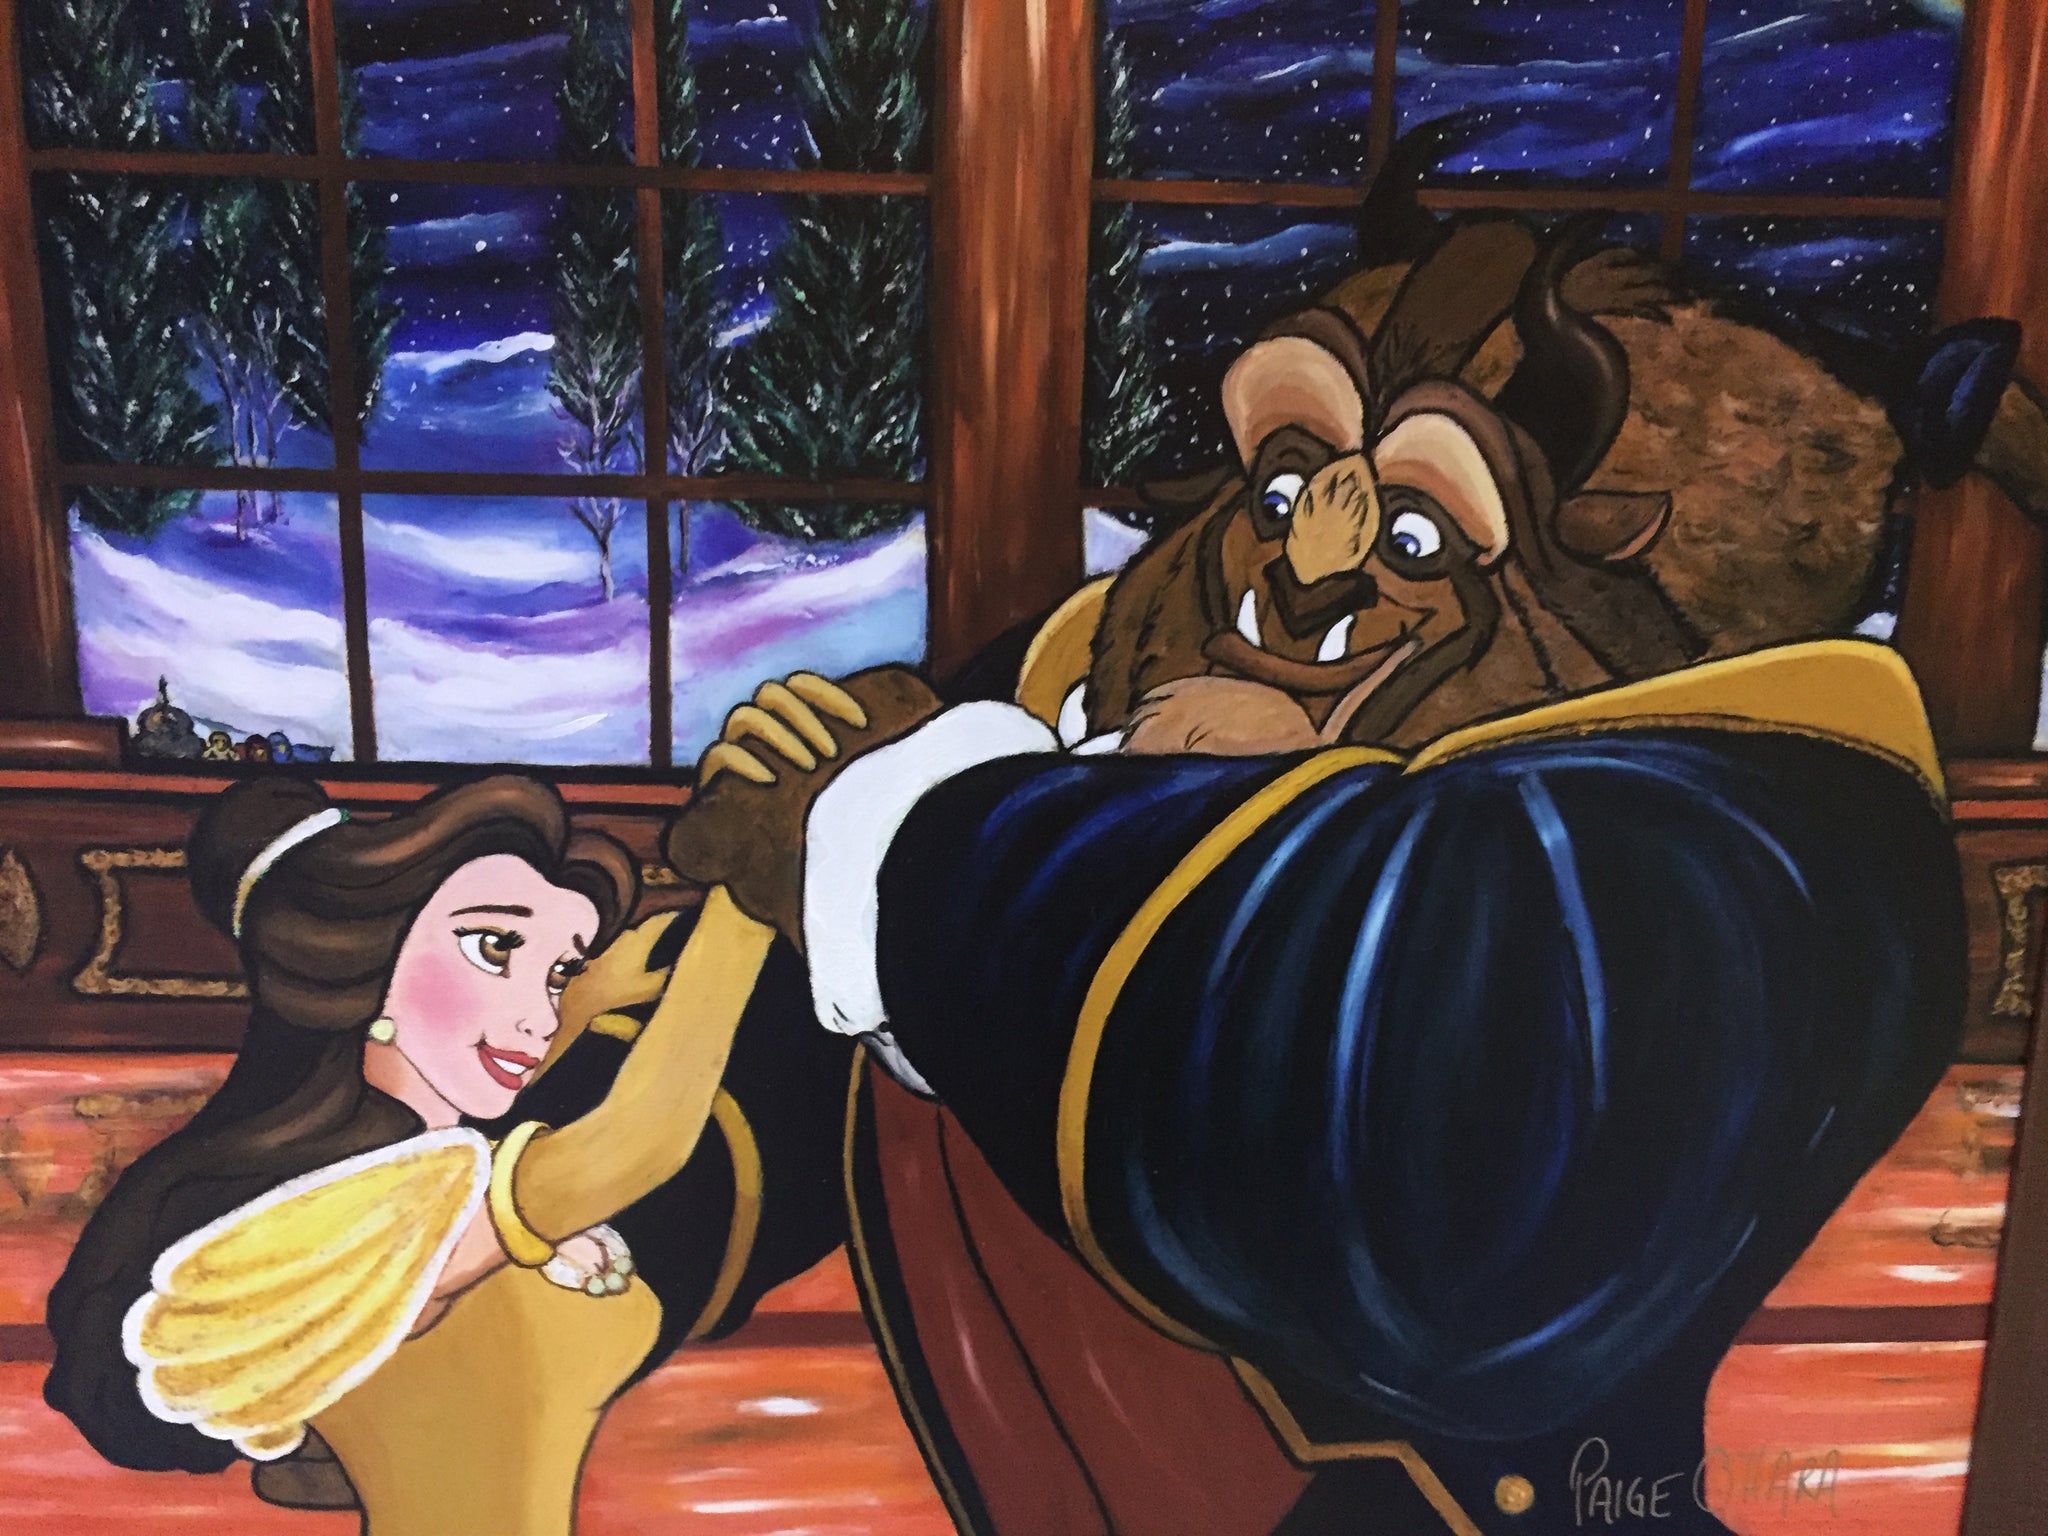 Ever A Surprise by Paige O'Hara inspired by Beauty and the Beast